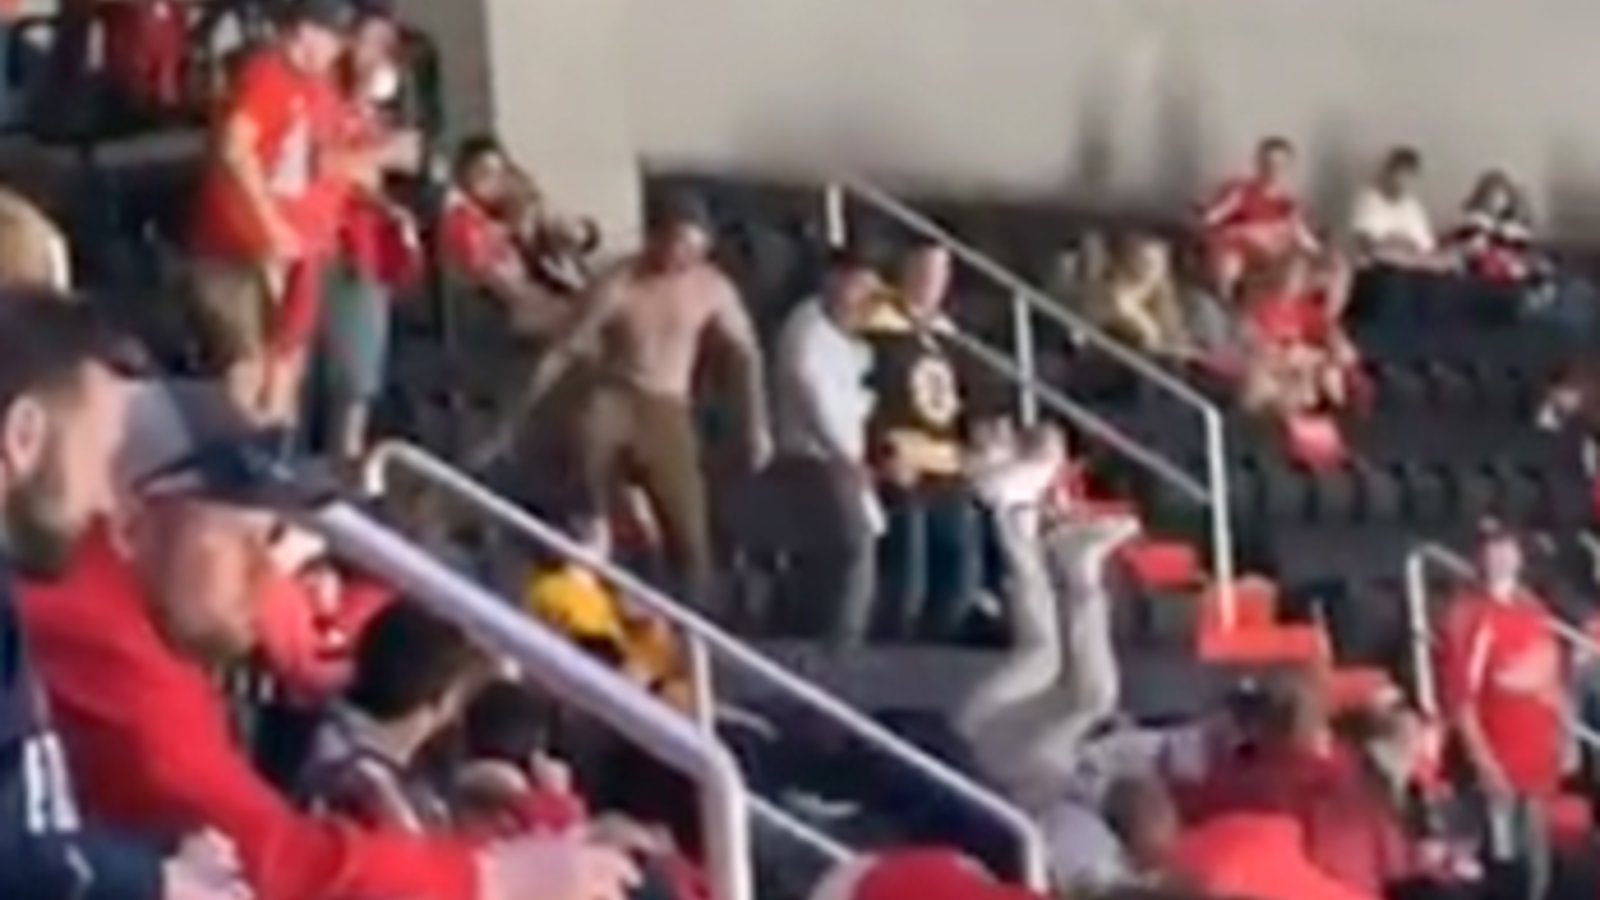 A fight breaks out in the nosebleeds in Game 2 of Capitals vs Bruins